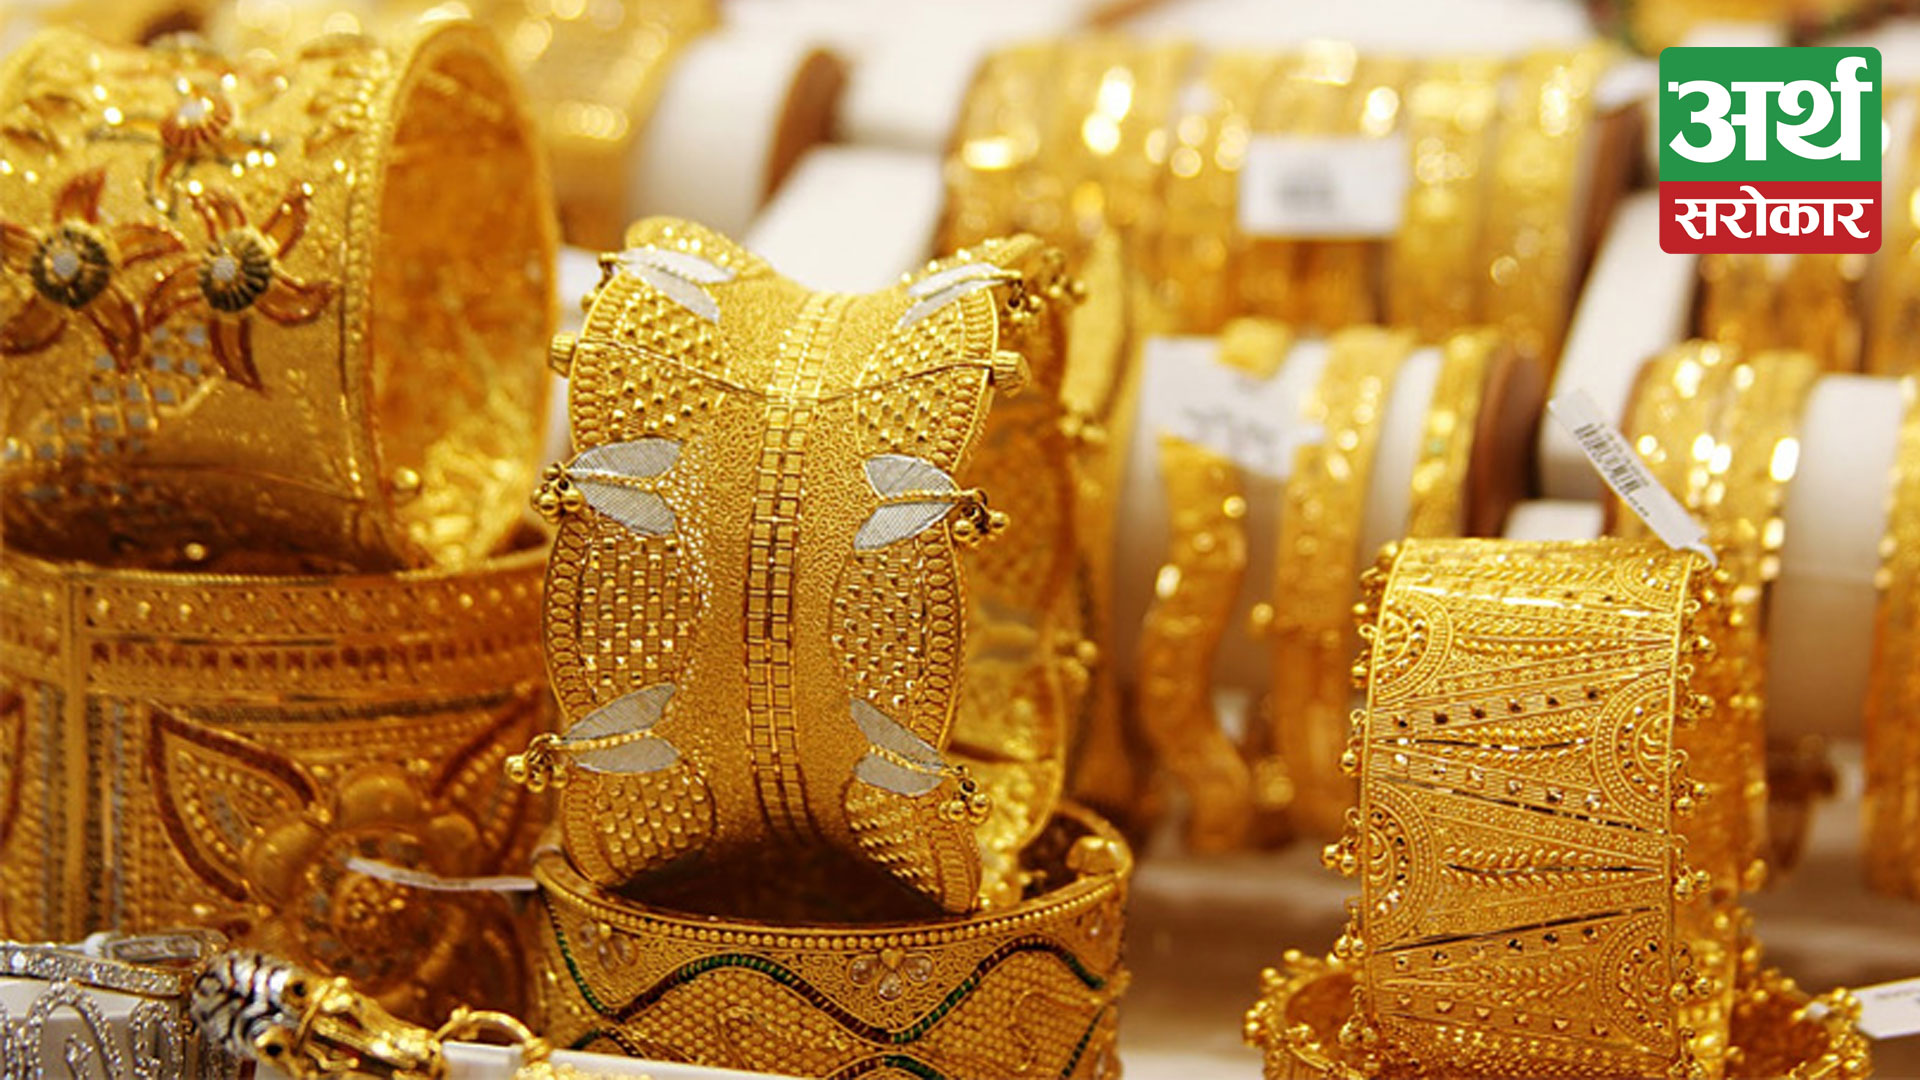 Price of gold increased by 700 rupees per tola